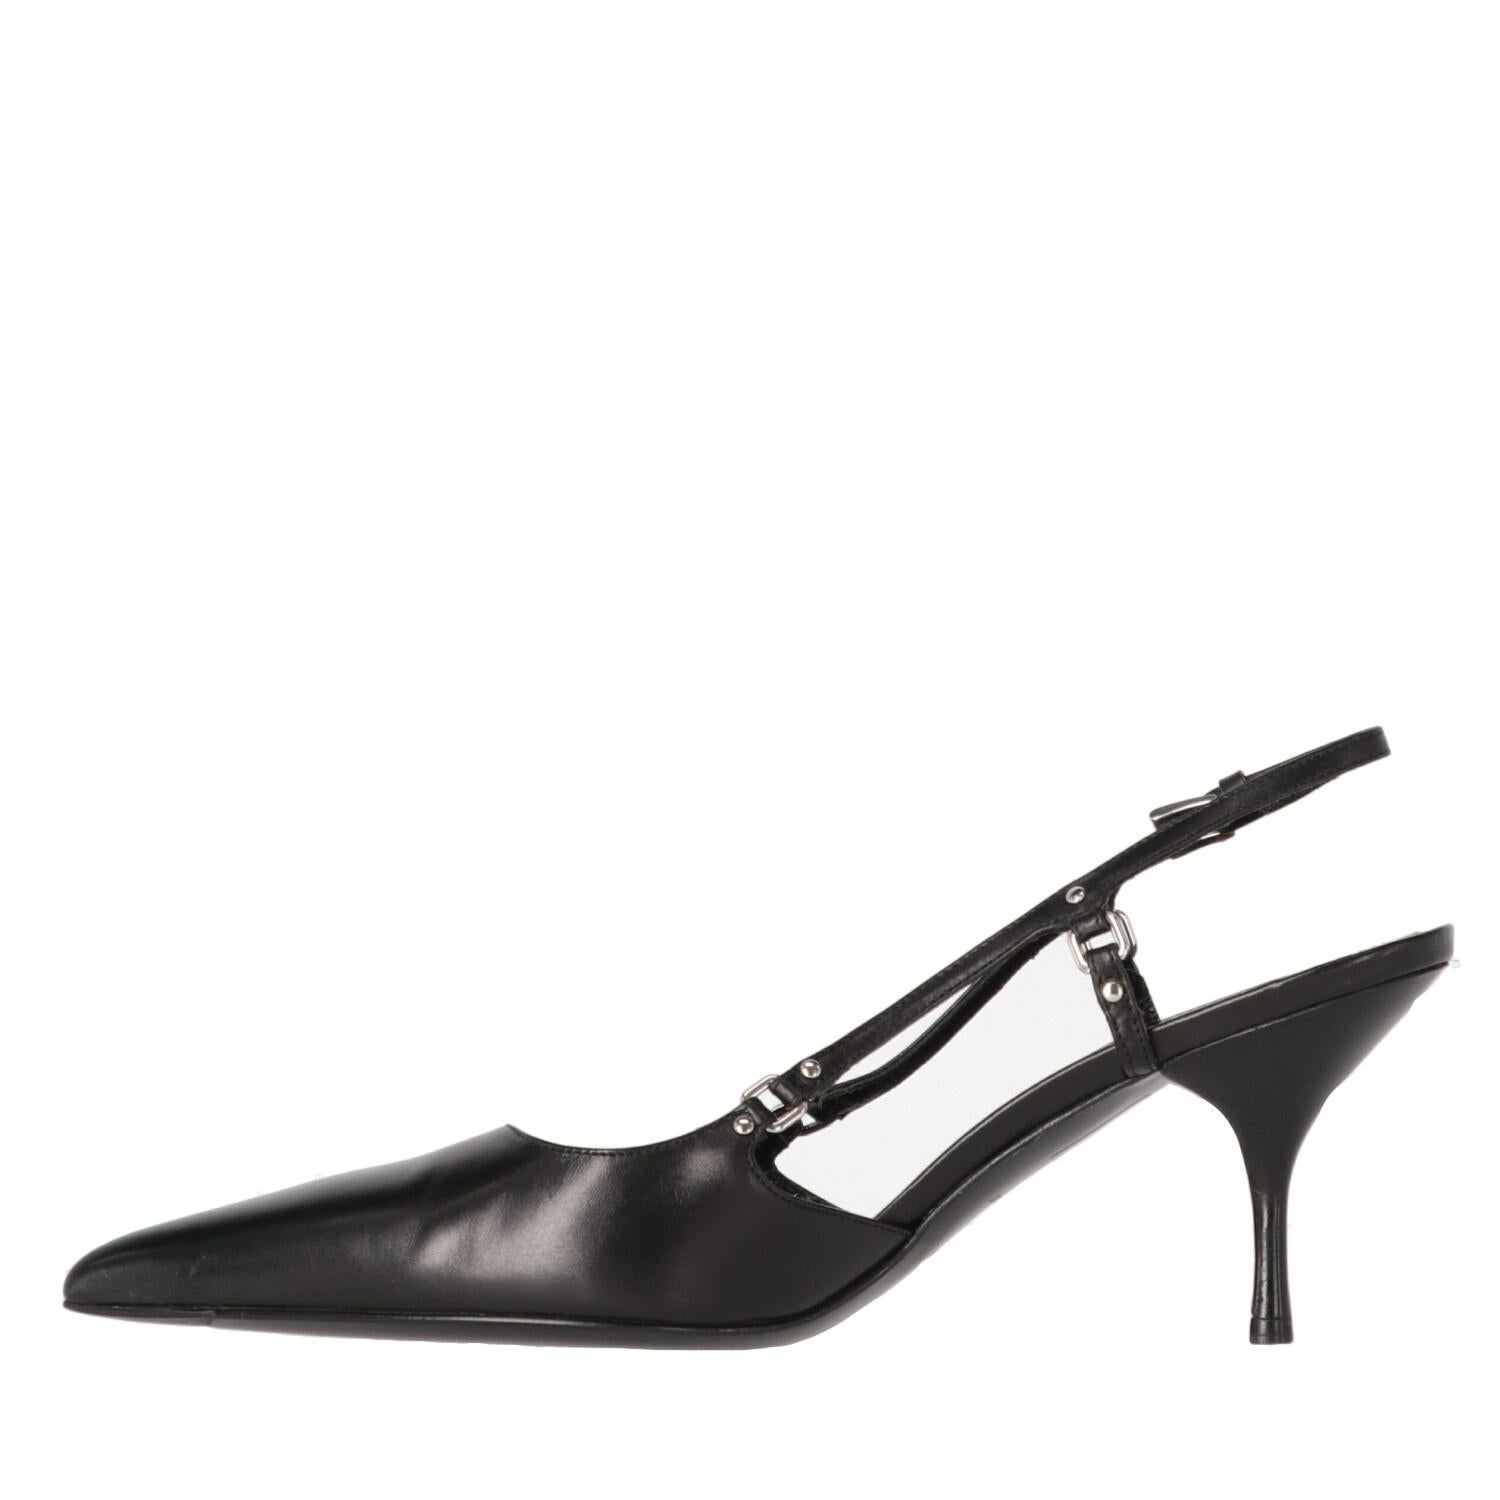 A.N.G.E.L.O. Vintage - ITALY
Prada black leather heeled slingback shoes with pointed toe. Model with little silver metal studs and ankle strap with silver metal buckle. Wooden kitten heels.

Item shows very light signs of wear on the leather, as